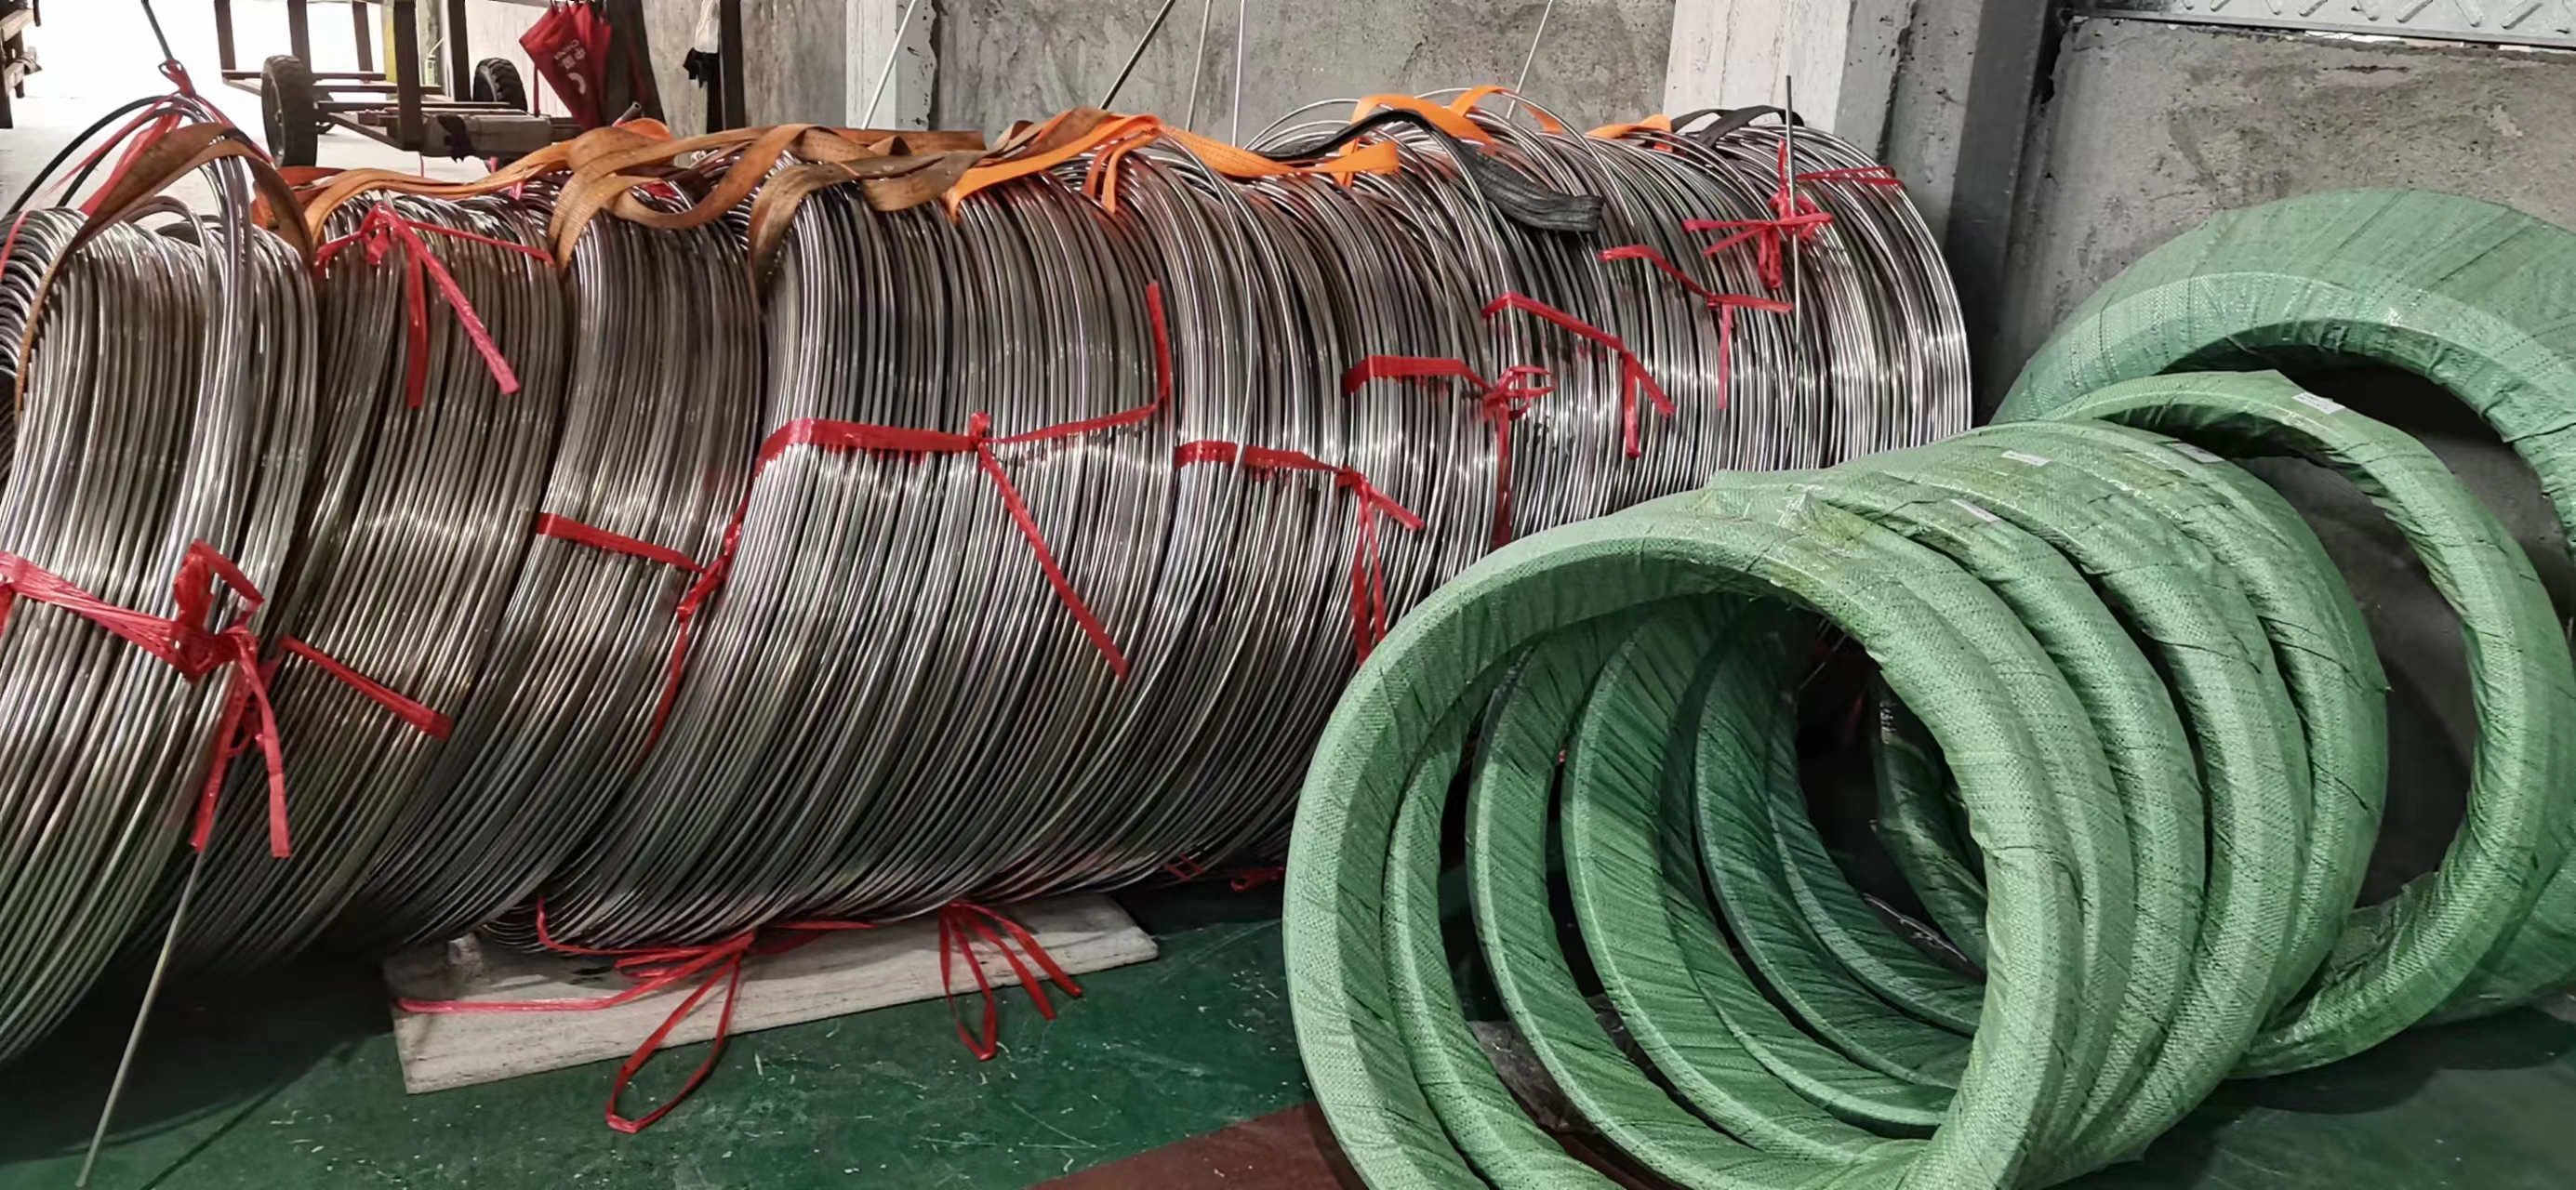 316N stainless steel coiled tubing/capillary tubing